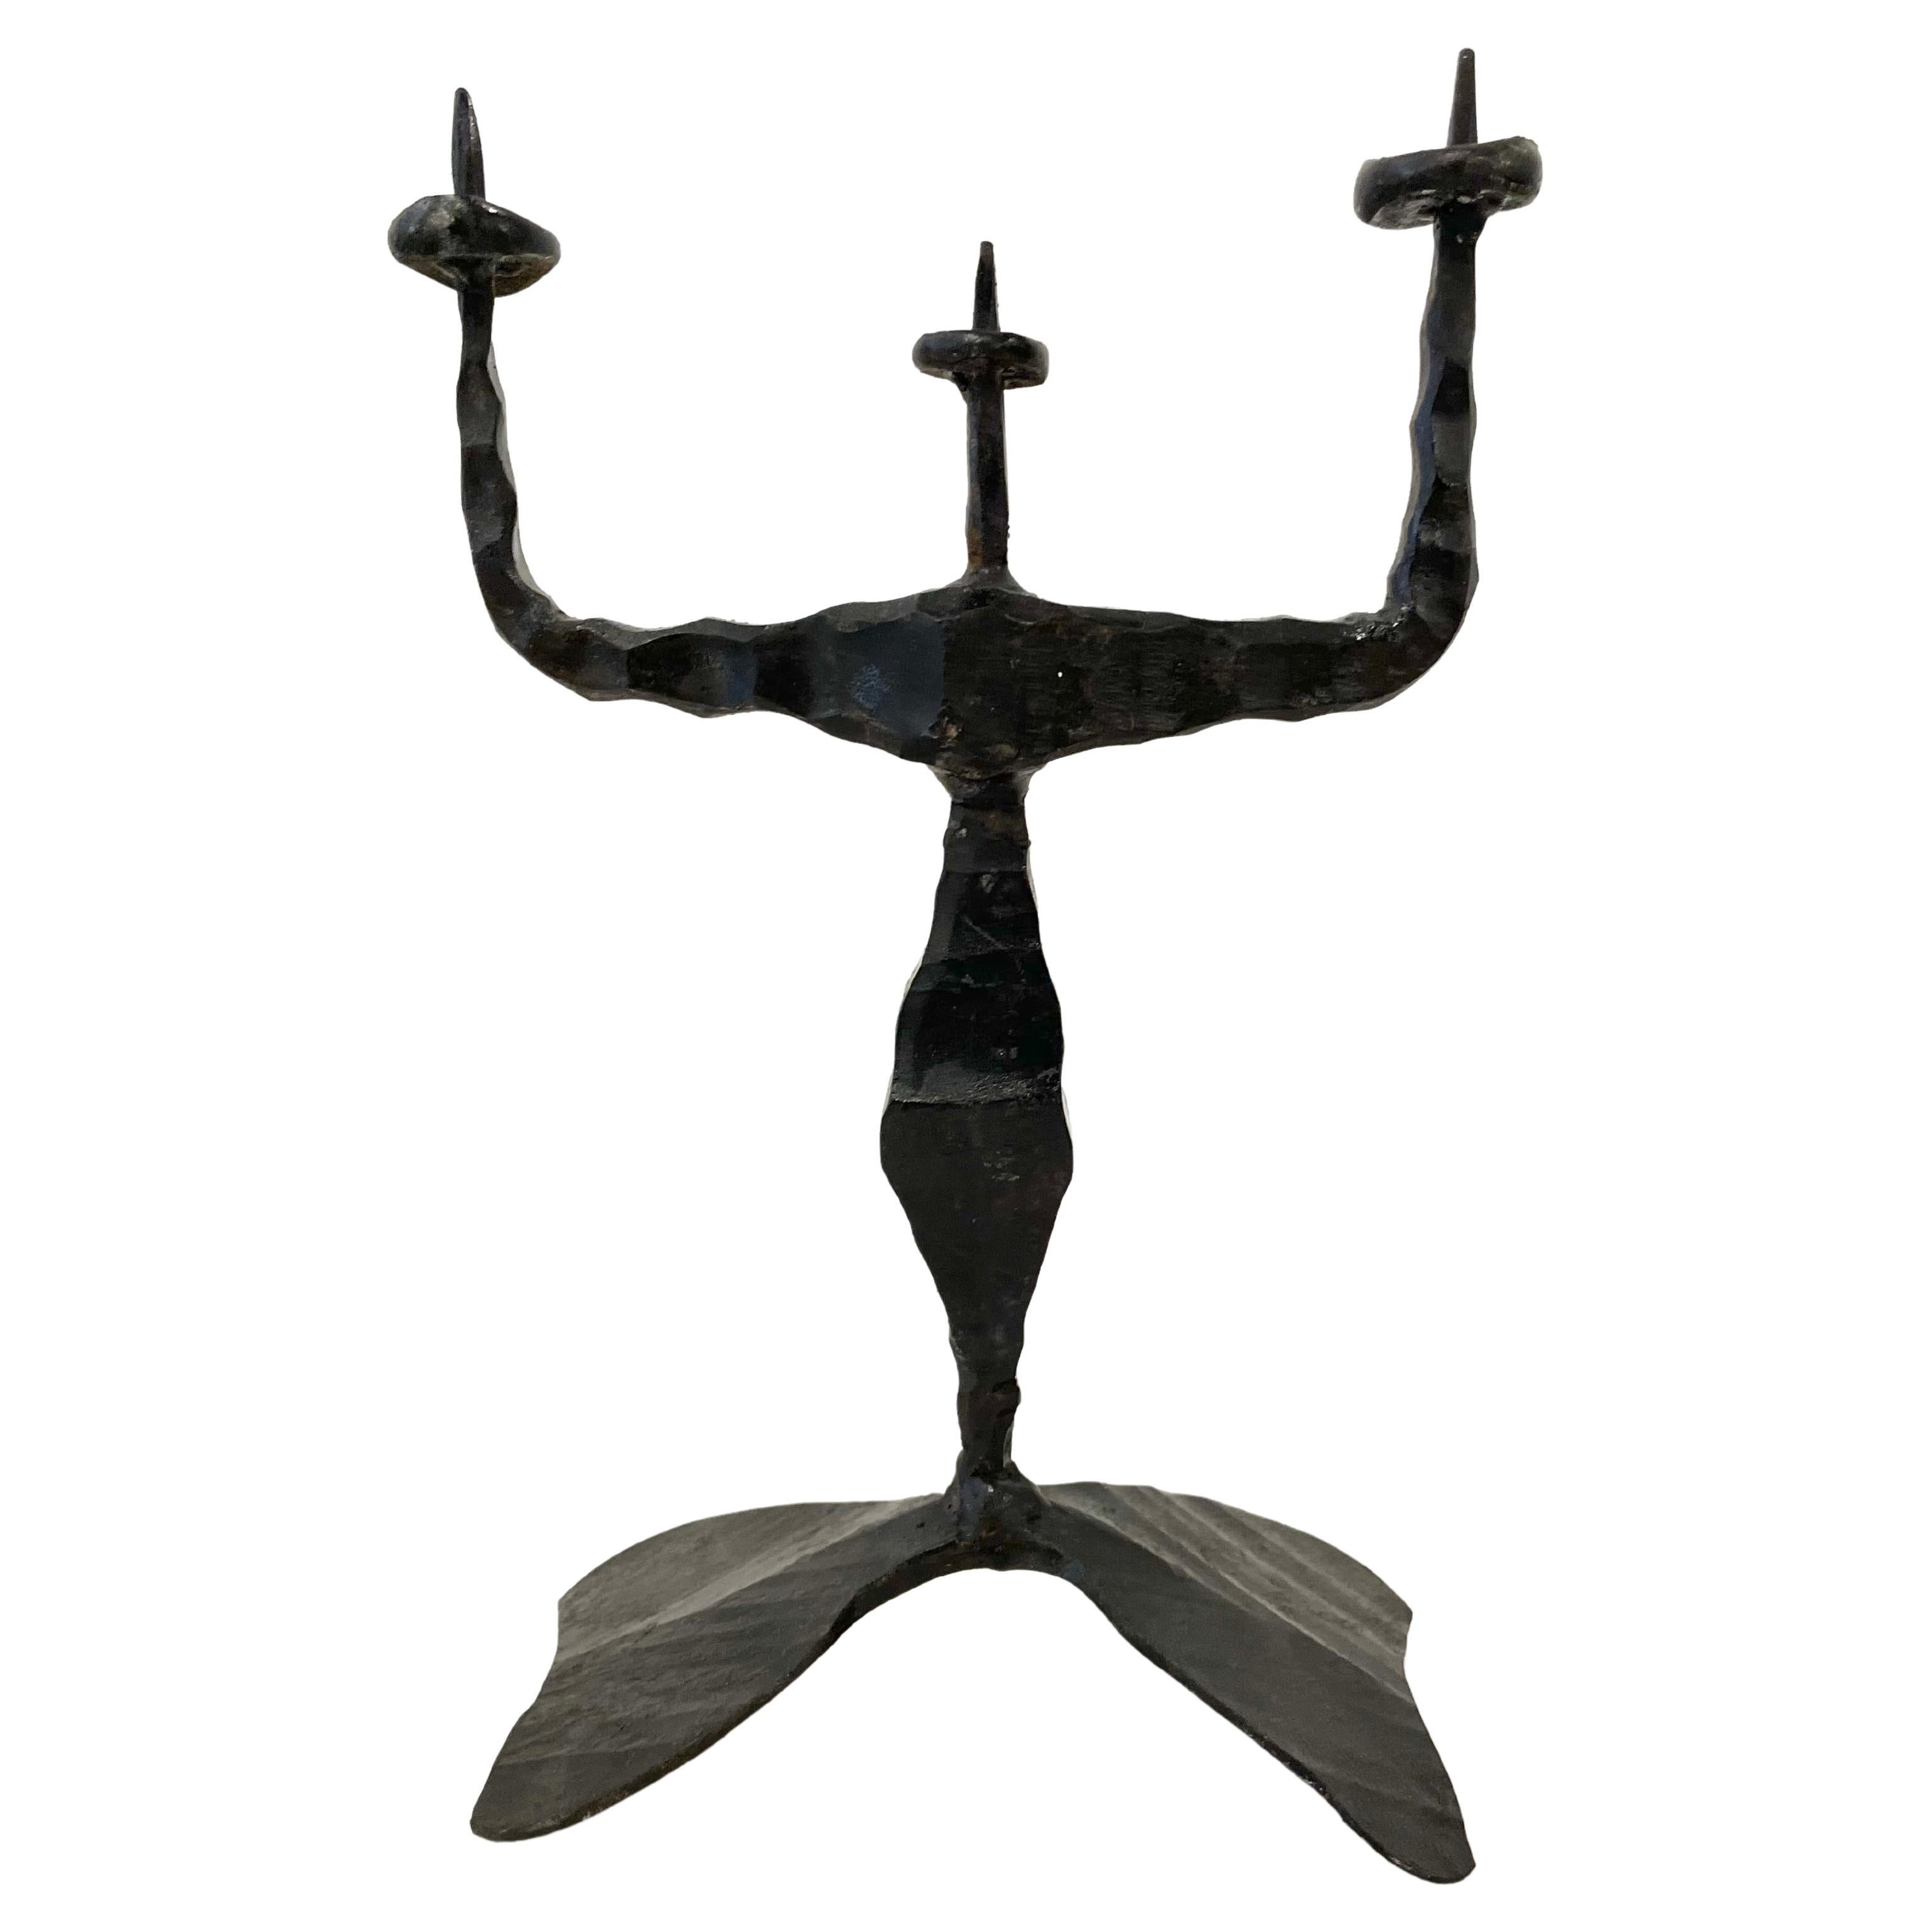 Mid-20th Century Israeli Brutalist Iron Candlesticks  by David Palombo For Sale